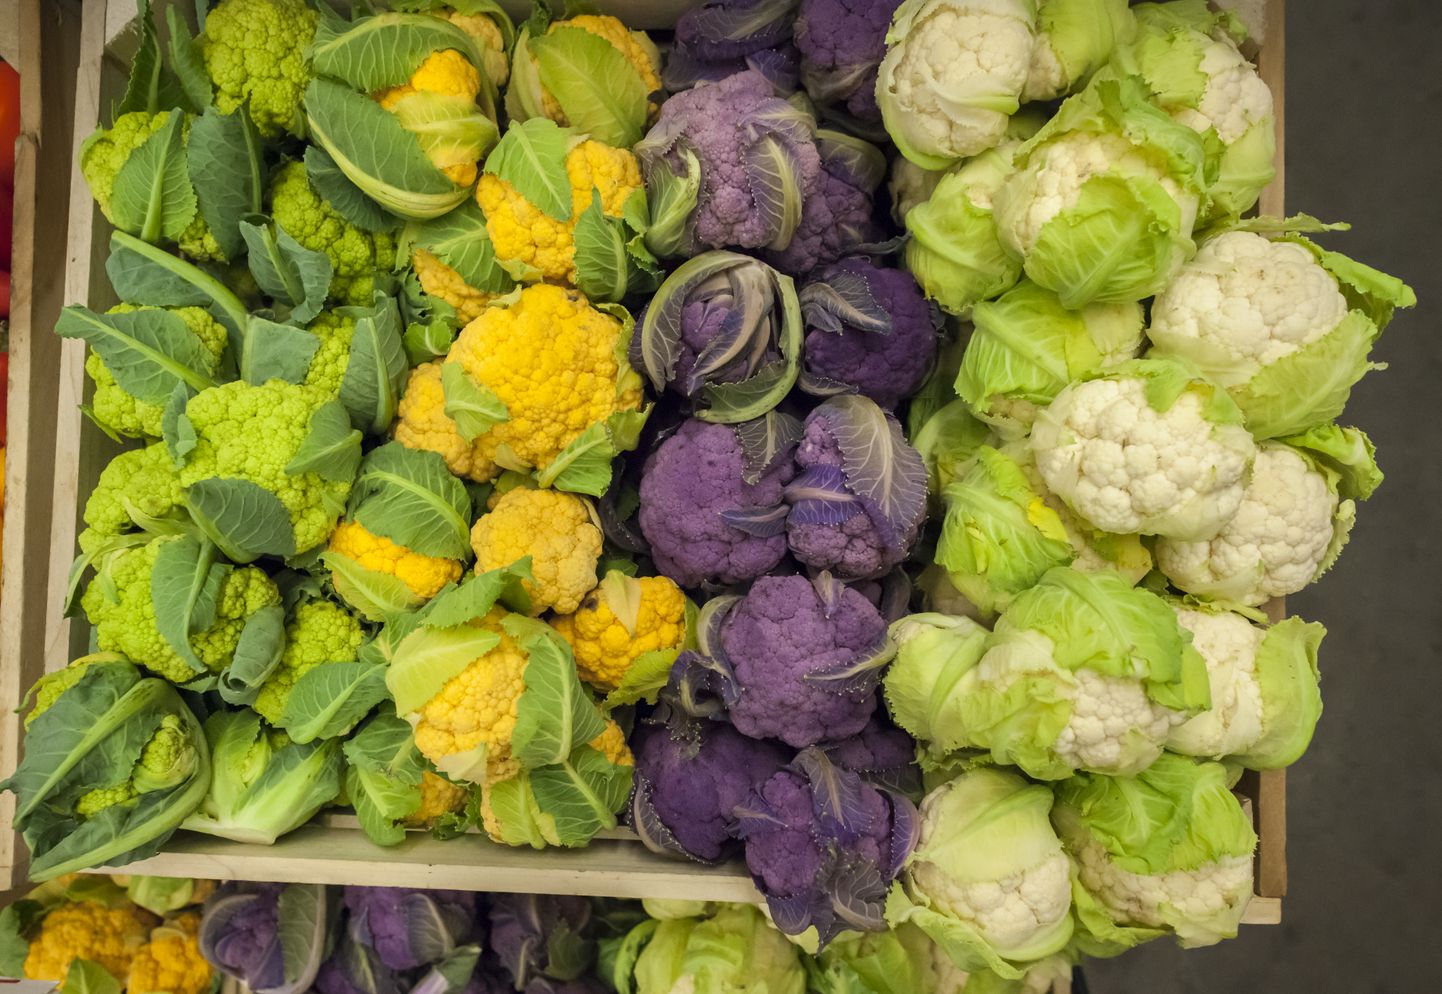 Colored baby cauliflower and other produce in a grocery store in New York on Monday, June 27, 2016. (Photo by Richard B. Levine) *** Please Use Credit from Credit Field ***